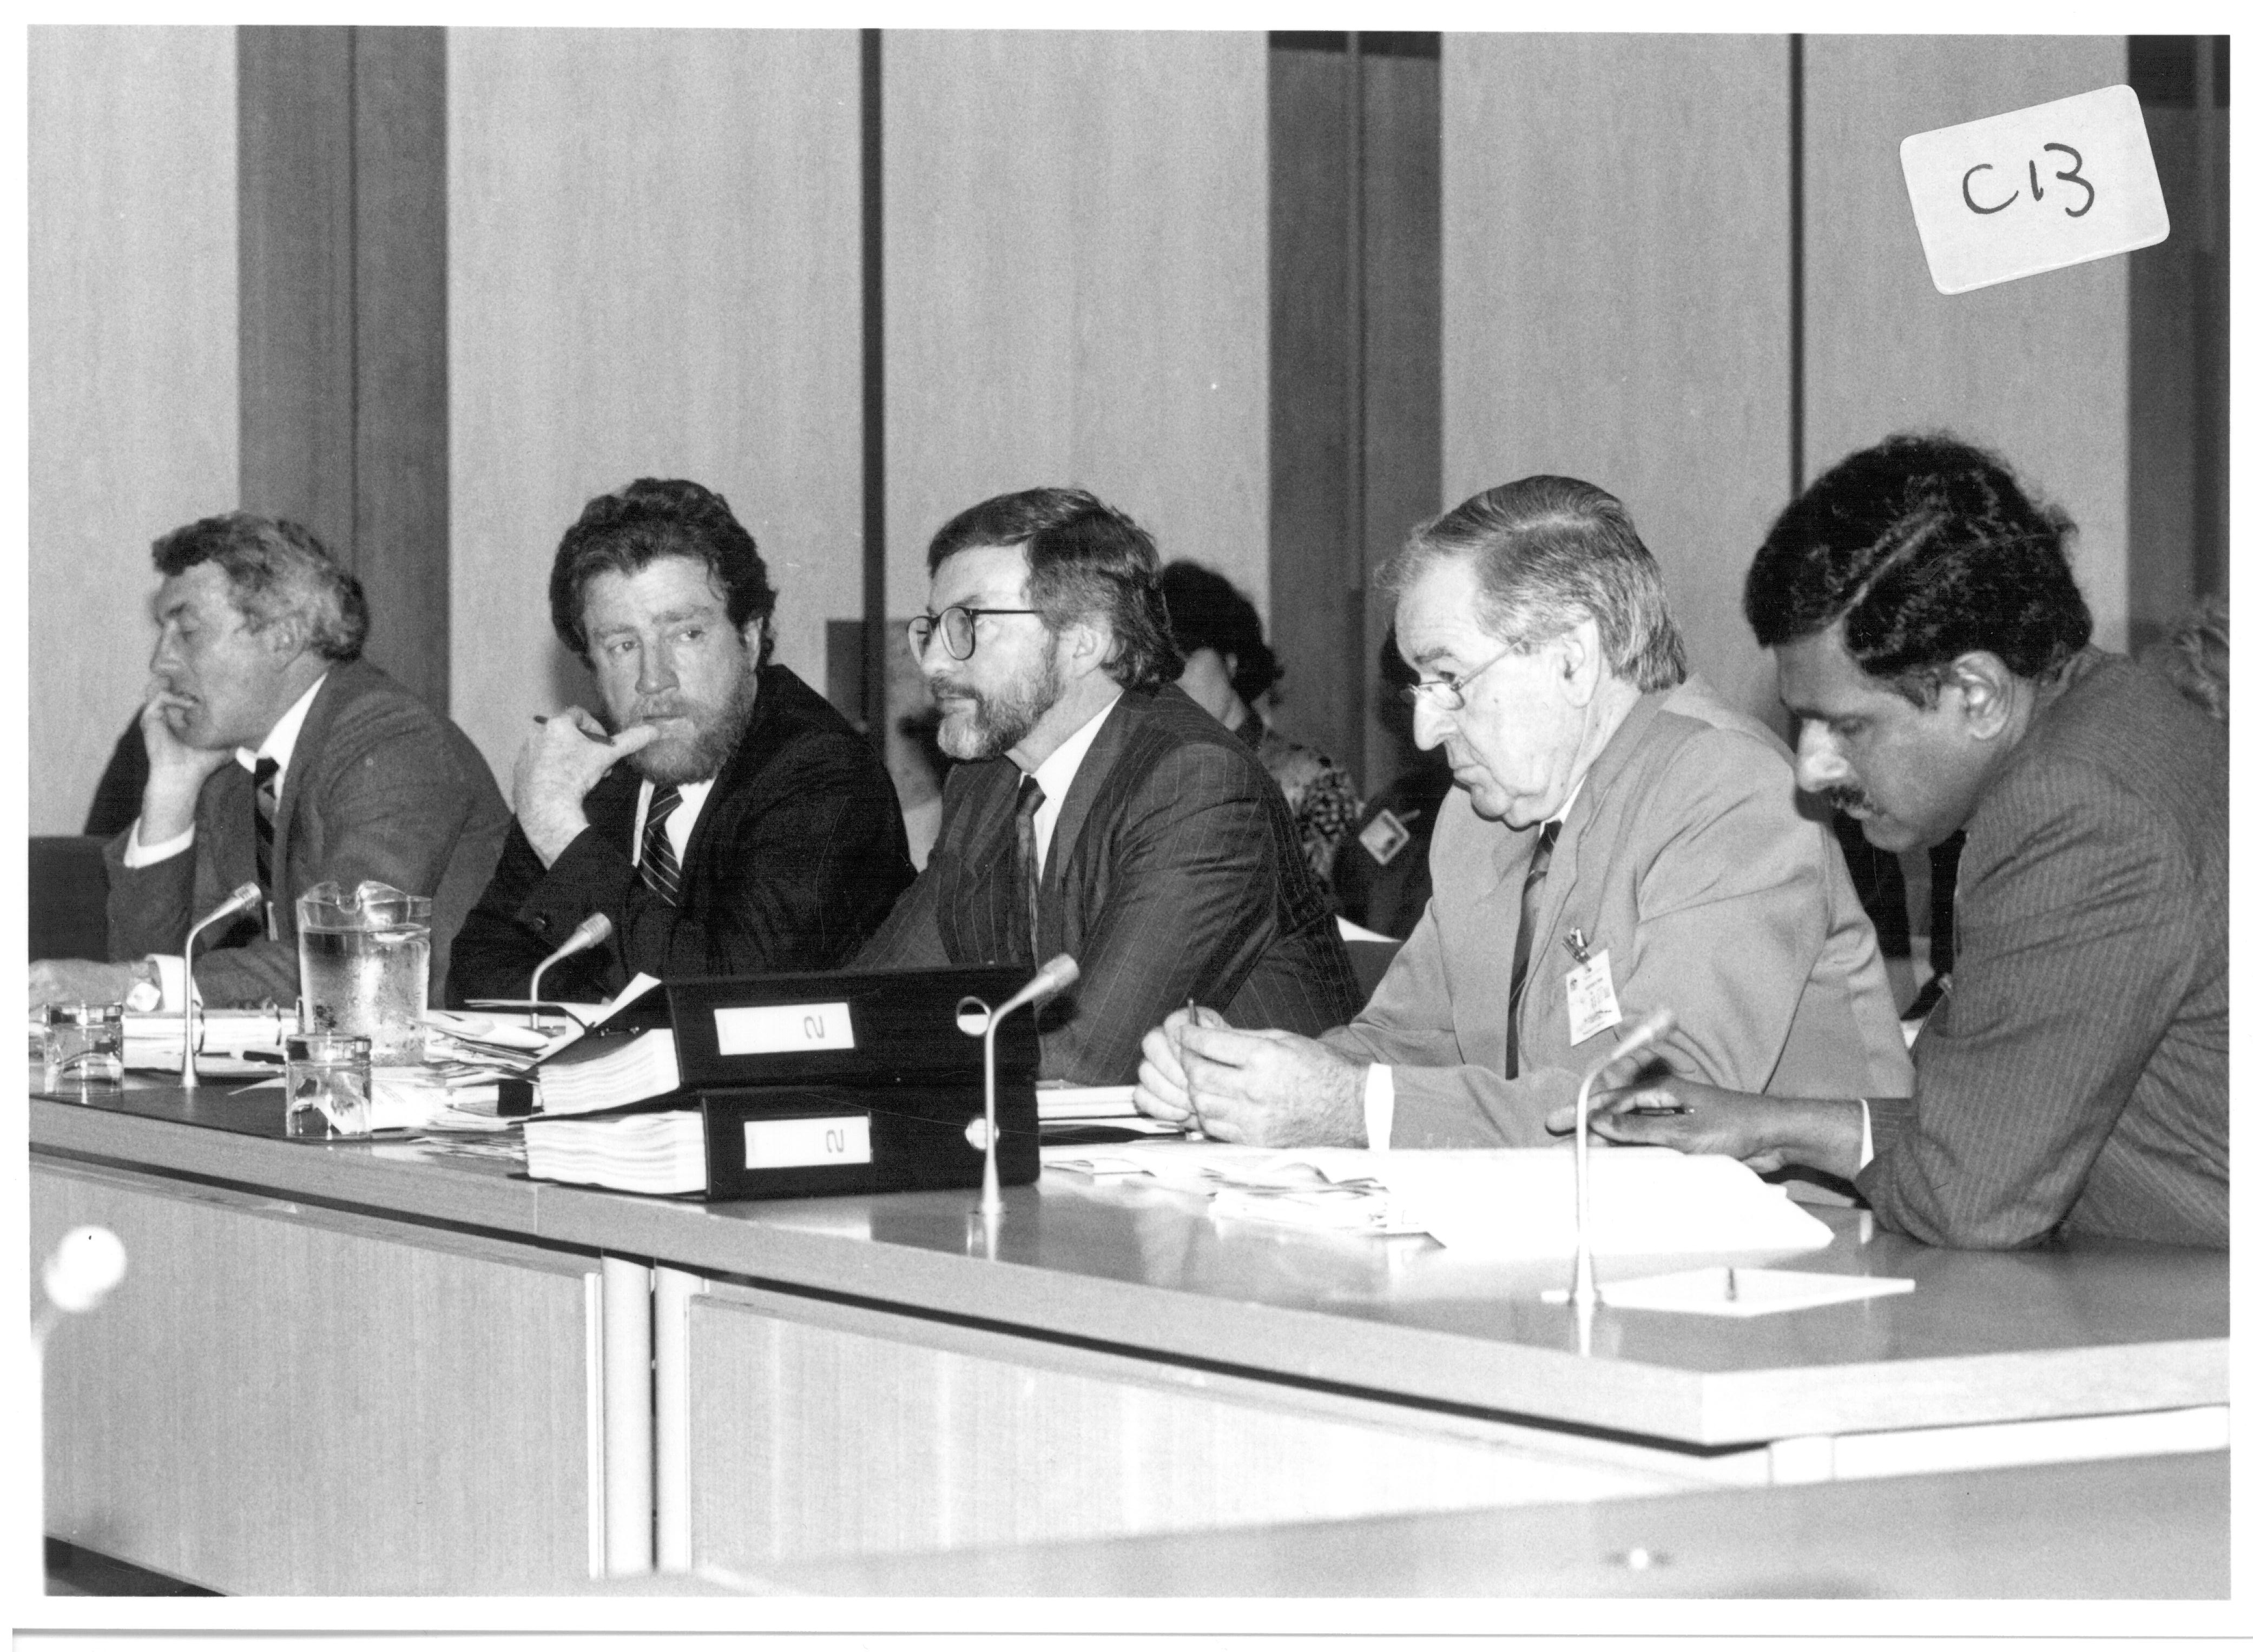 Estimates Committe F supplementary budget estimates hearing, 13 September 1990. L-R: Tom Munyard [Assistant Secretary, Corporate Services Branch, Department of Industrial Relations], Bob Marshman [Deputy Secretary, Department of Industrial Relations], Senator the Hon Peter Cook [Minister for Industrial Relations], Ken Stone [National Director, Australian Trade Union Training Authority] and Trevor Prabhakaran [Acting Manager, Administration and Finance, Australian Trade Union Training Authority]. Image by Peter West, Government Photographic Service.